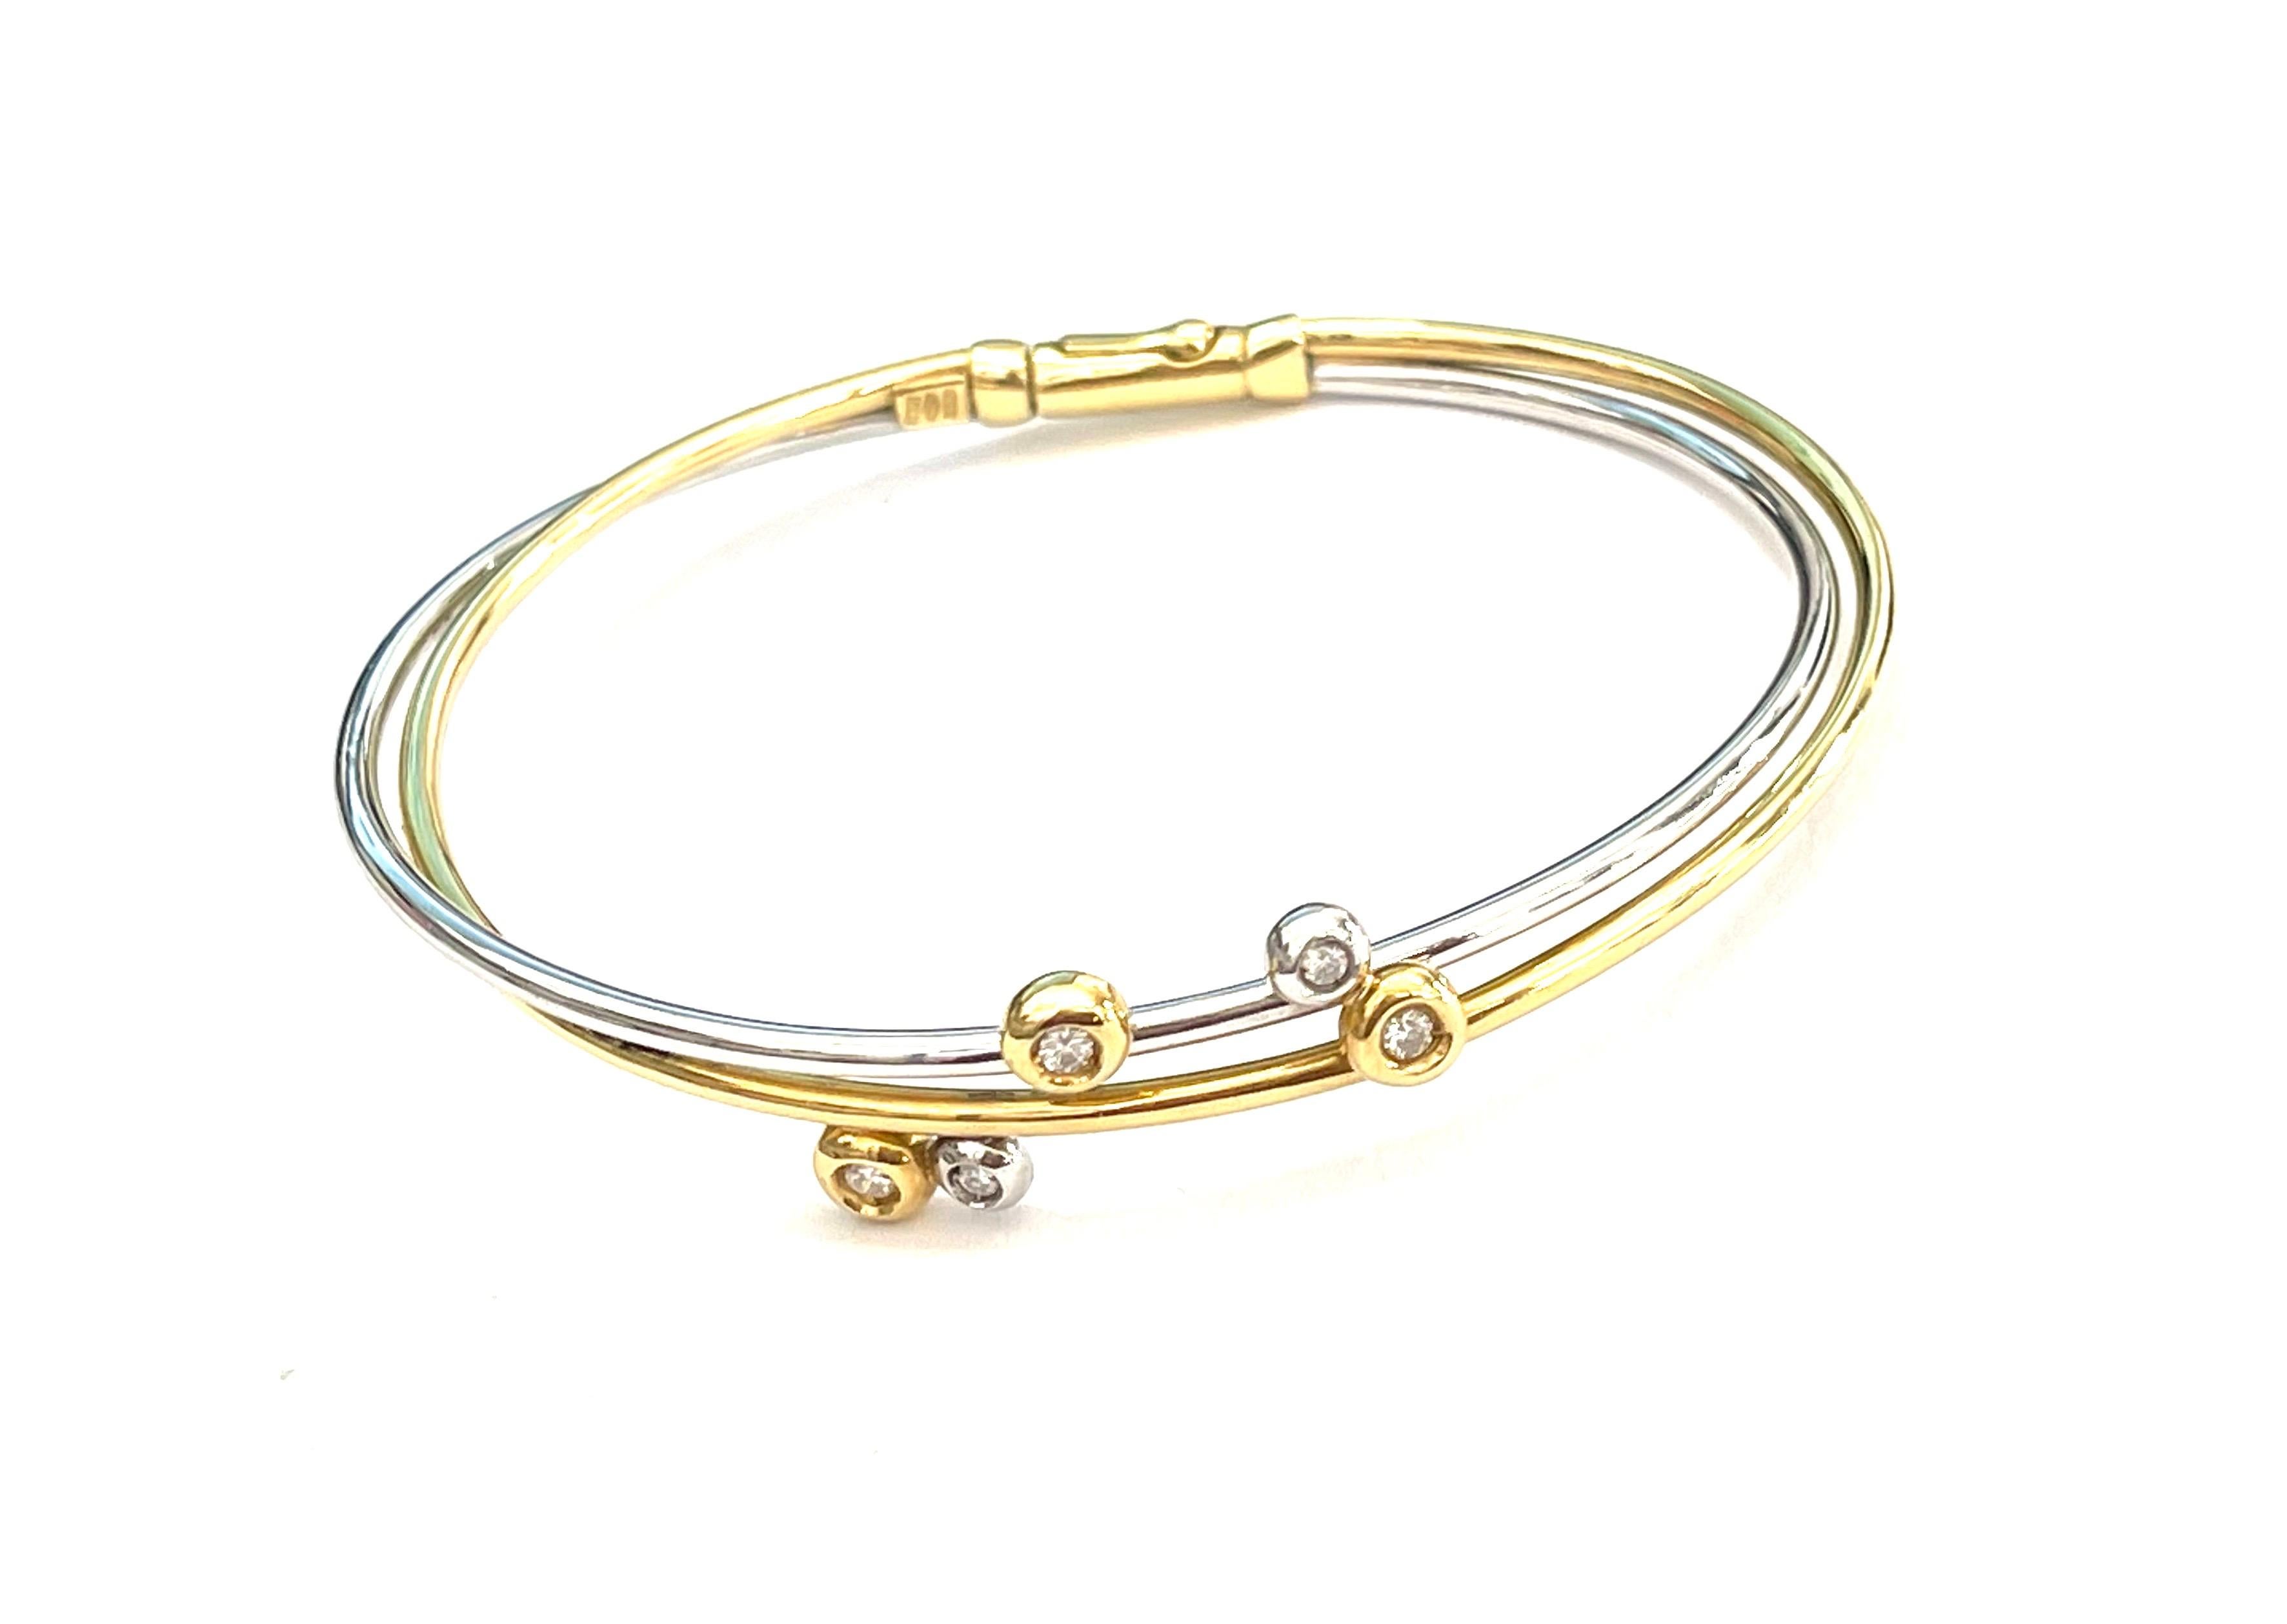 White gold and yellow gold bracelet with white diamonds from the collection champagne. Very easy to wear for its flexibility.
The total weight of the gold is GR 10.90
The weight of diamonds is ct 0.16

Stamp 10 MI 750

